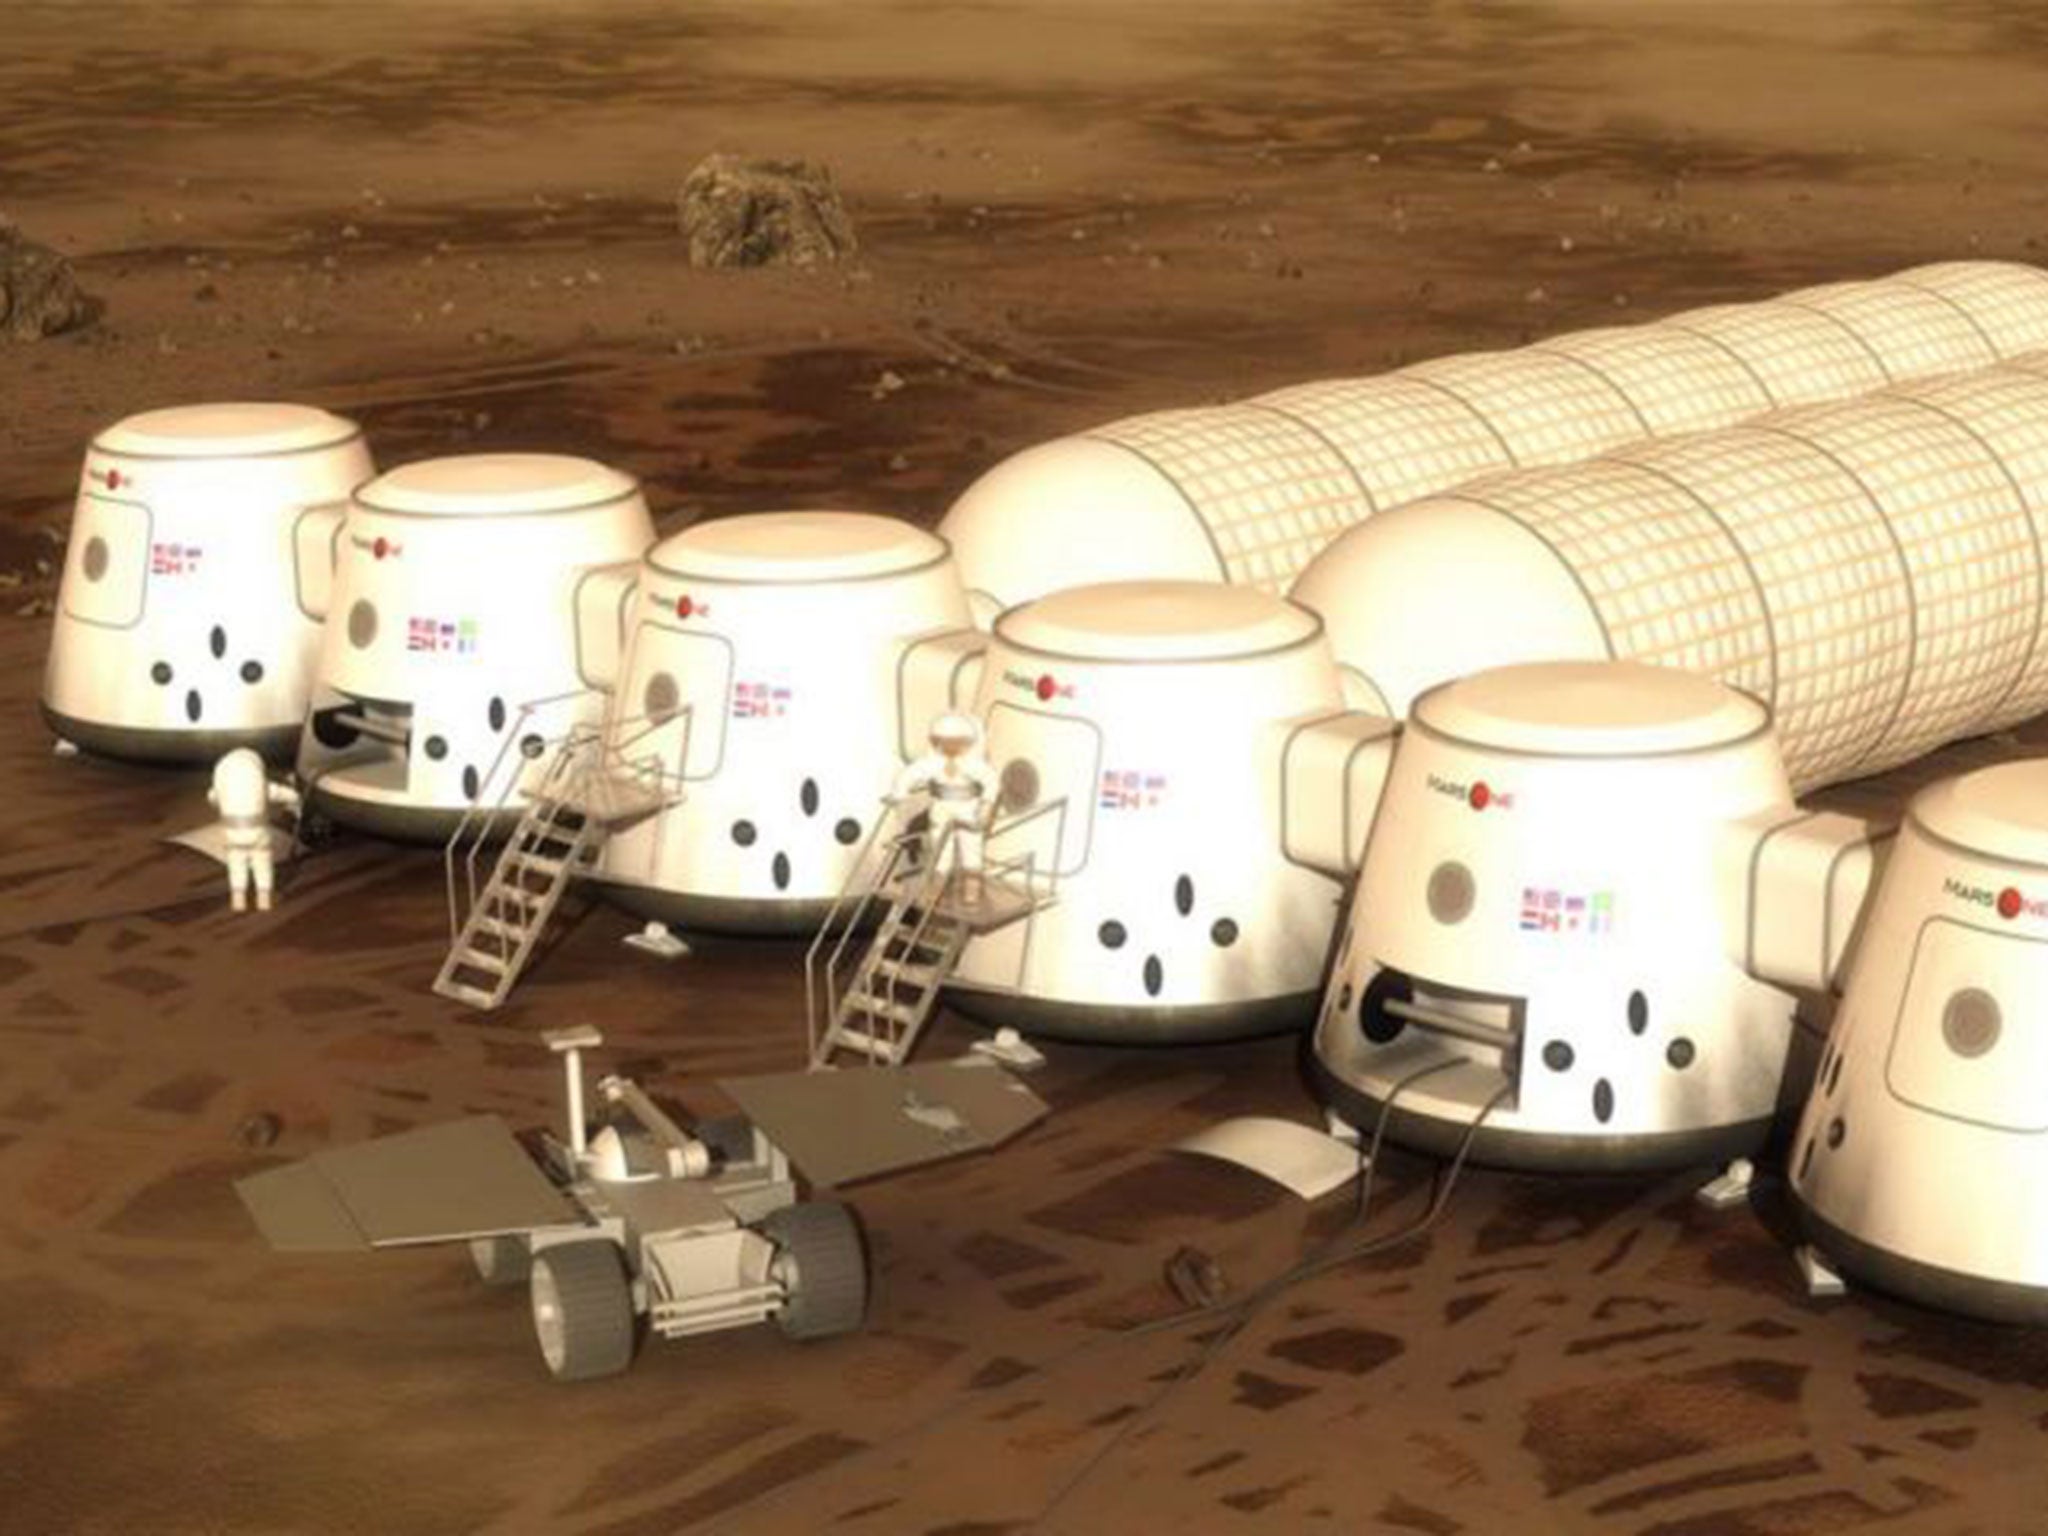 An artist’s impression of the Mars One colony on the Red Planet where 20 people are expected to live. About 200,000 people applied for the planned one-way trip to Mars in 2025